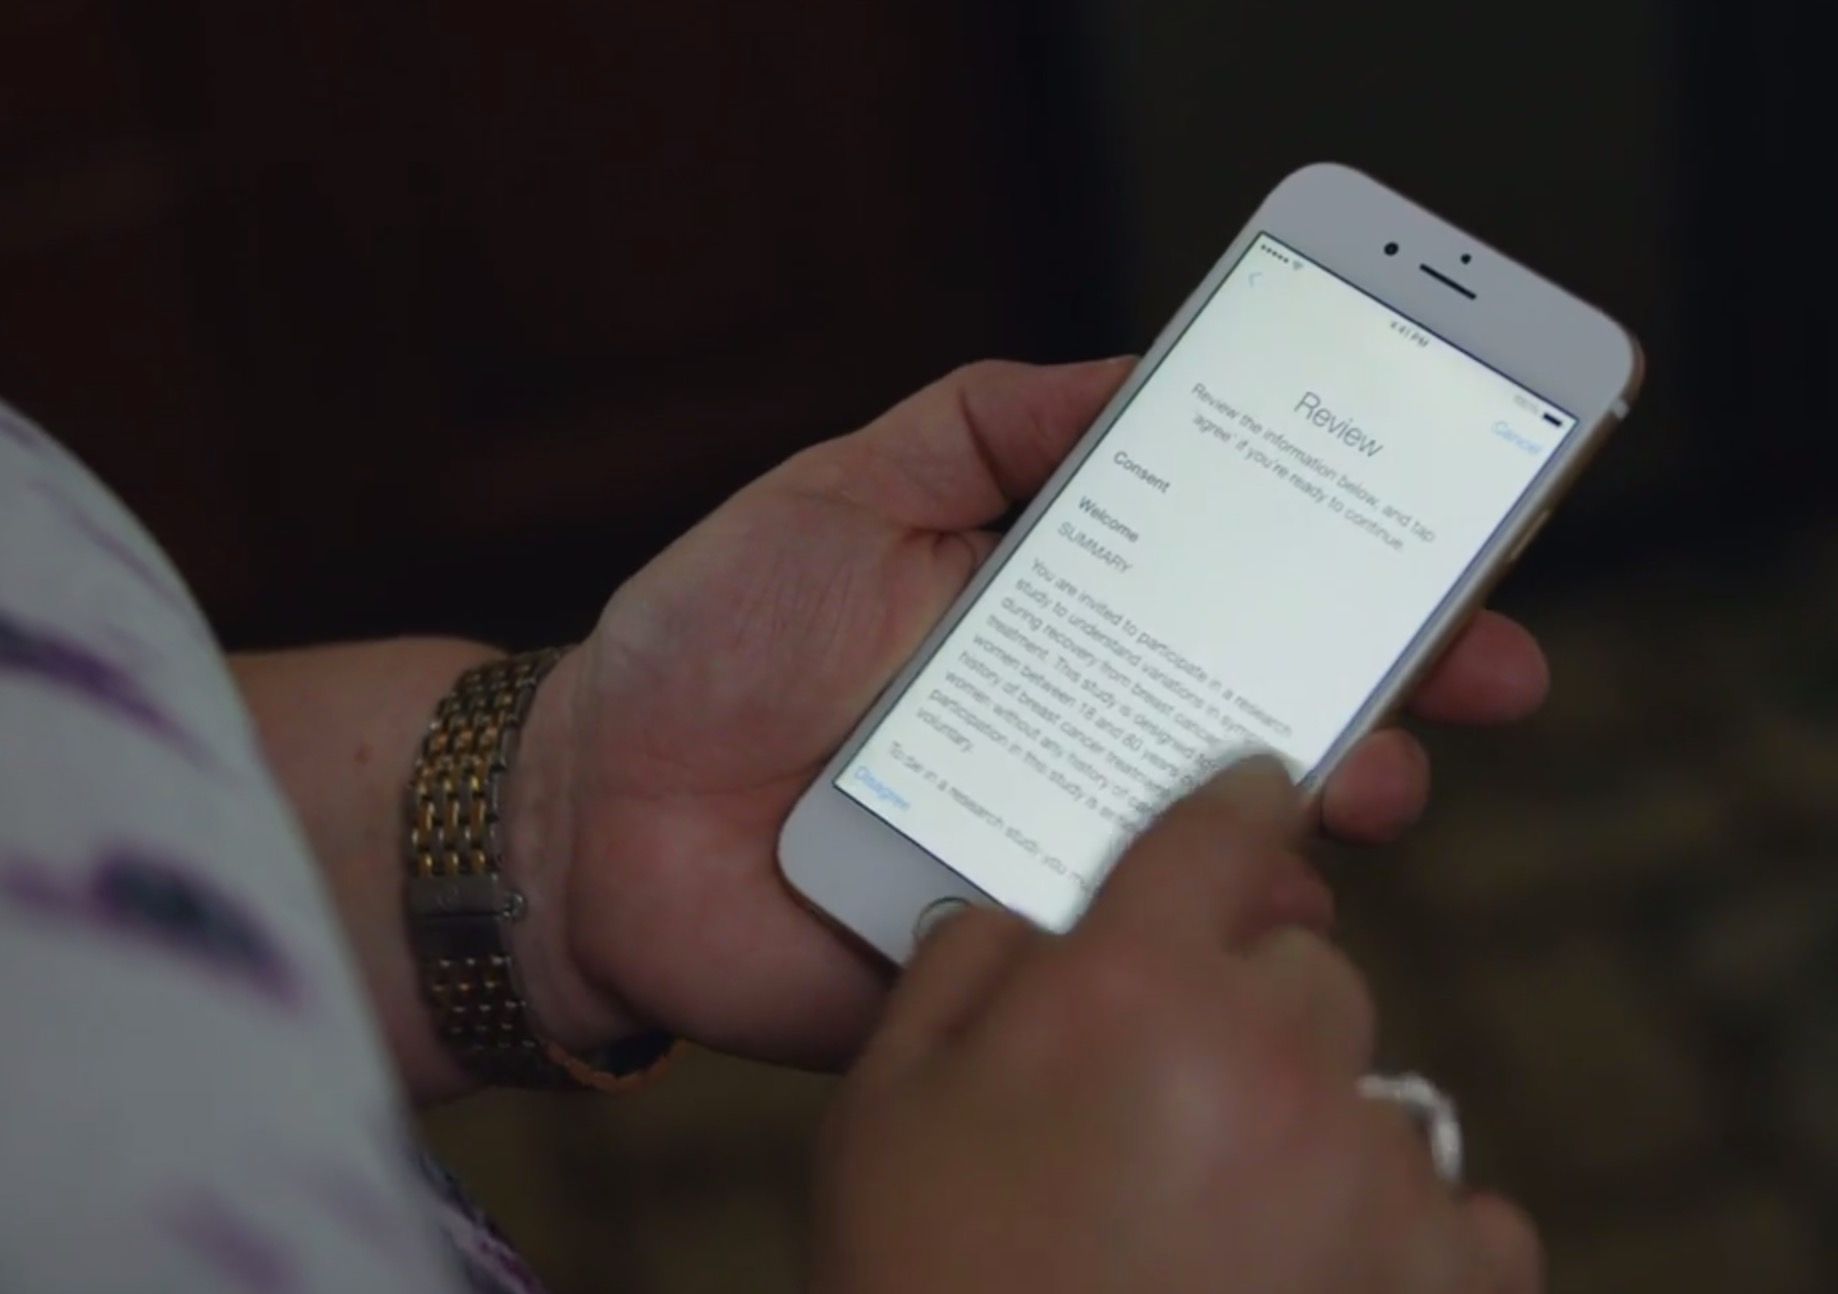 apple researchkit and carekit everything you need to know image 5